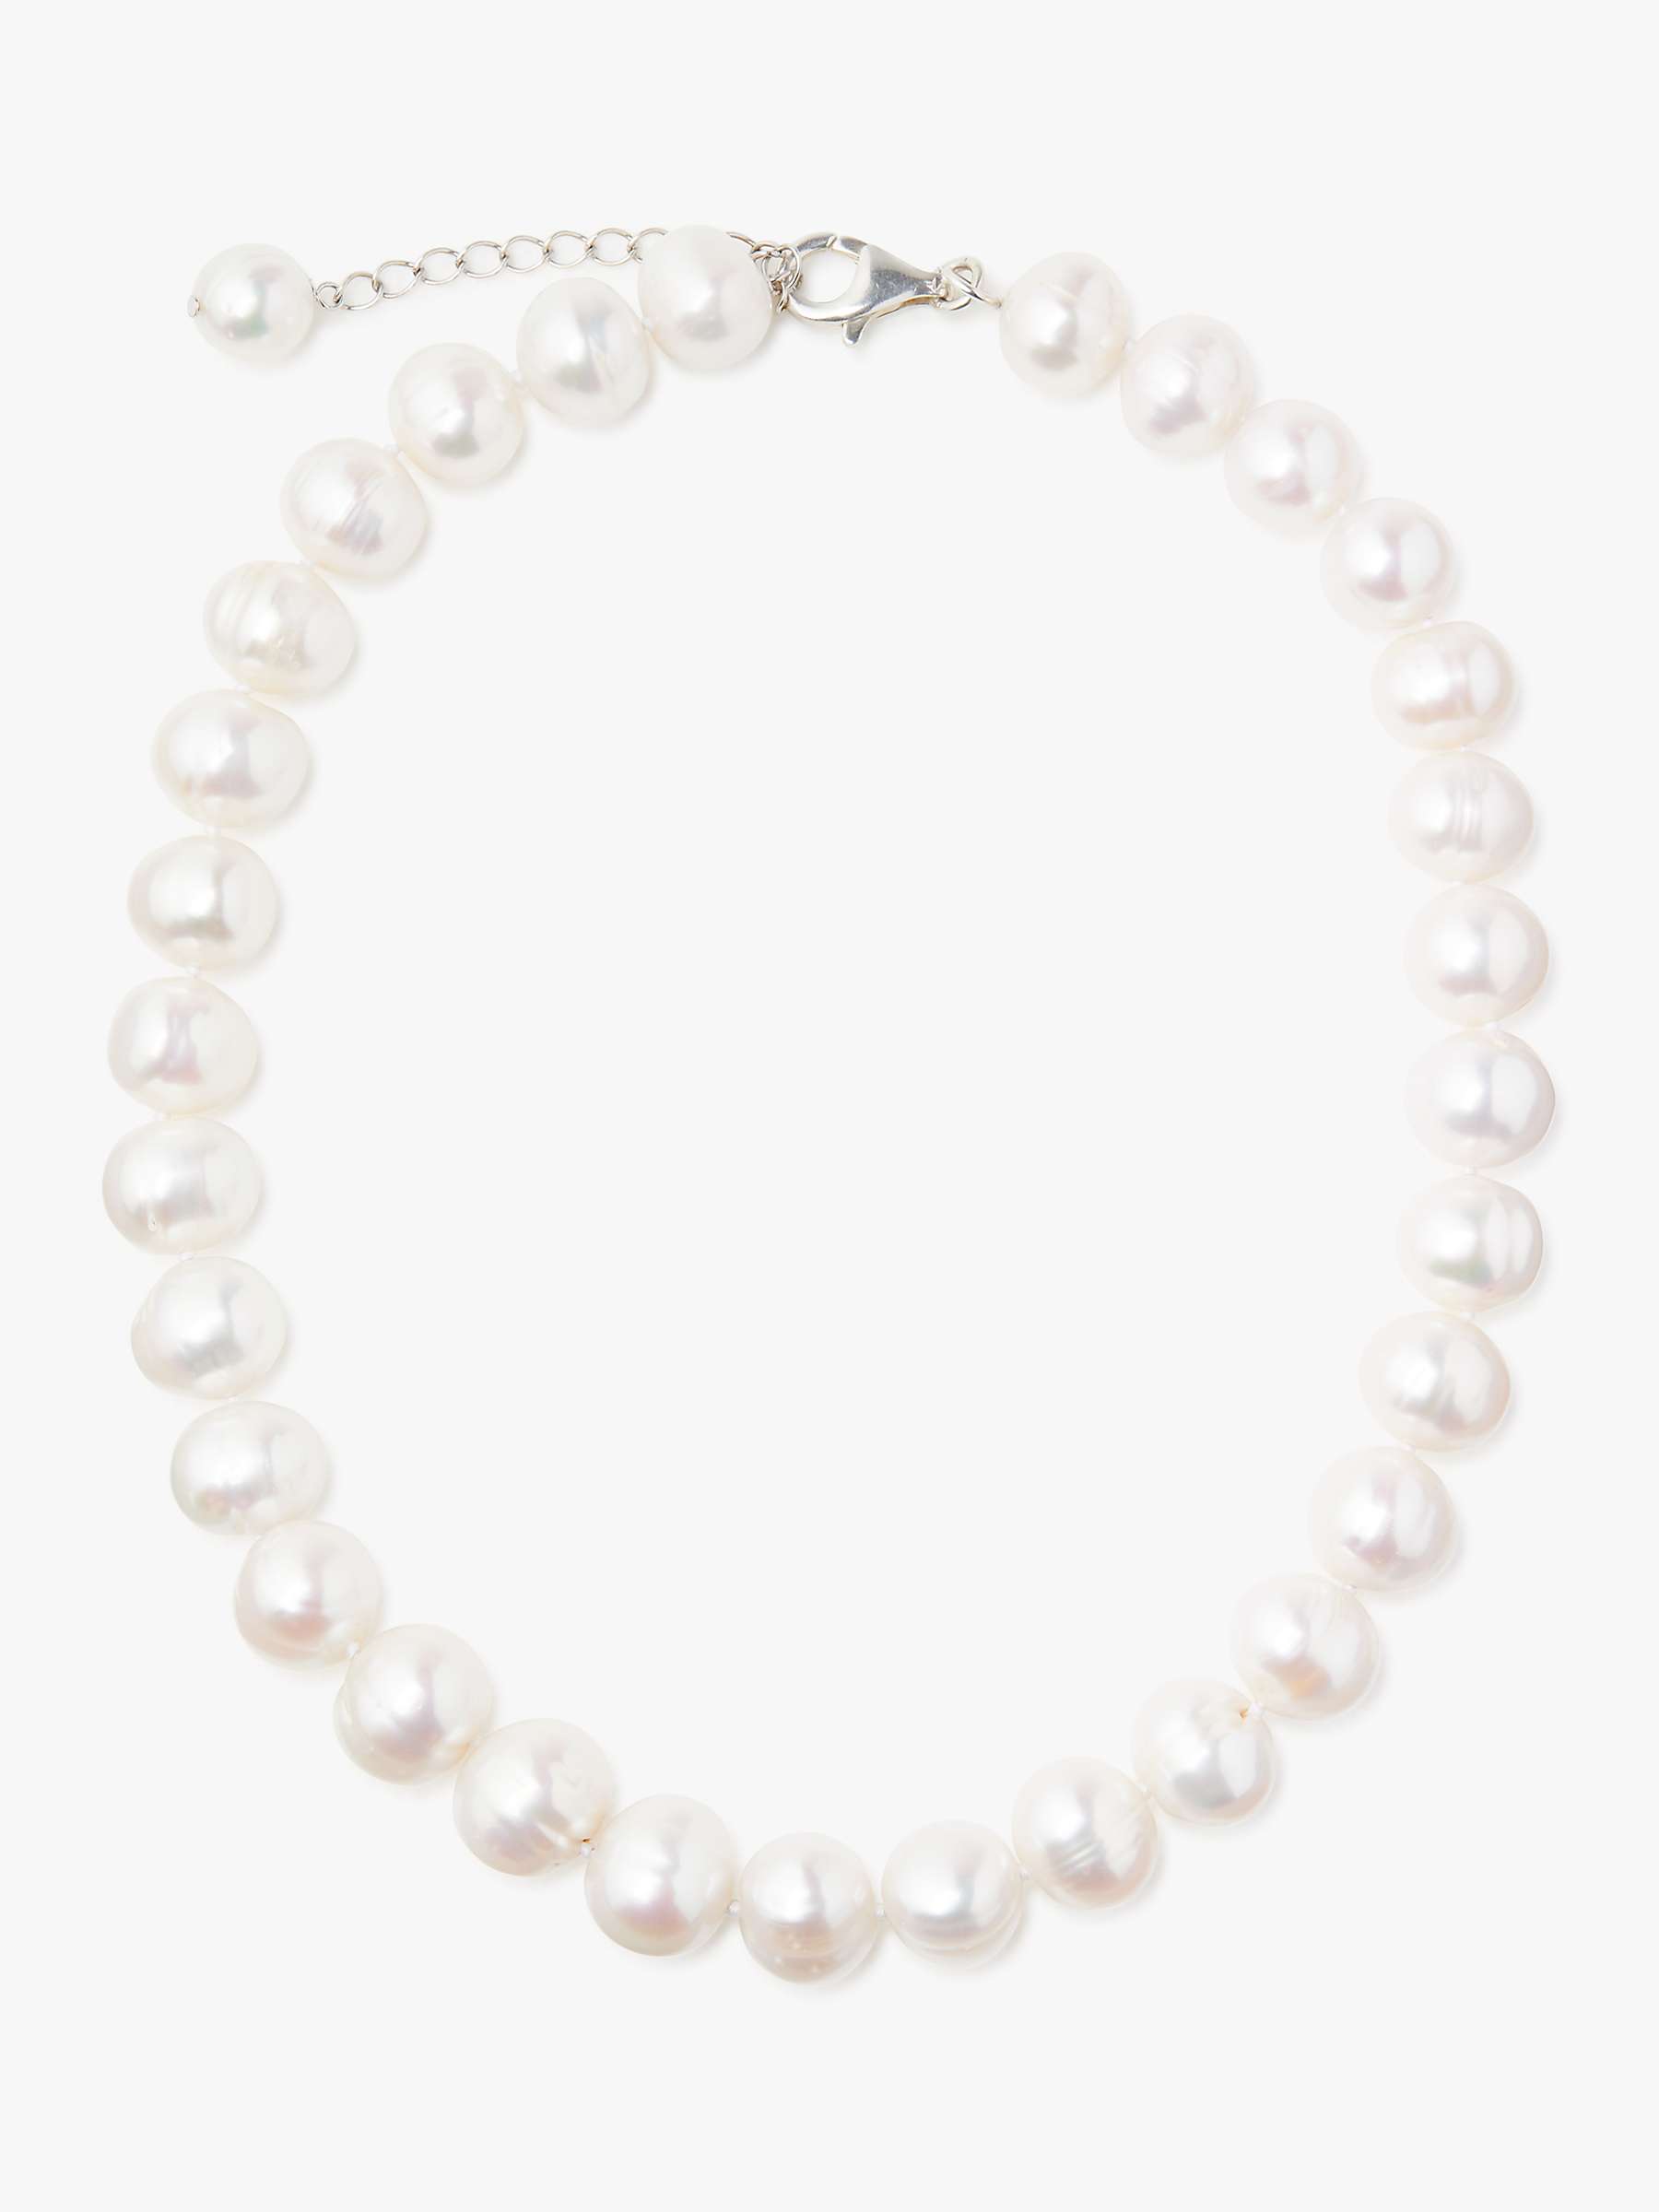 Buy Lido Pearls Extra Large Freshwater Pearl Single Row Necklace, White Online at johnlewis.com